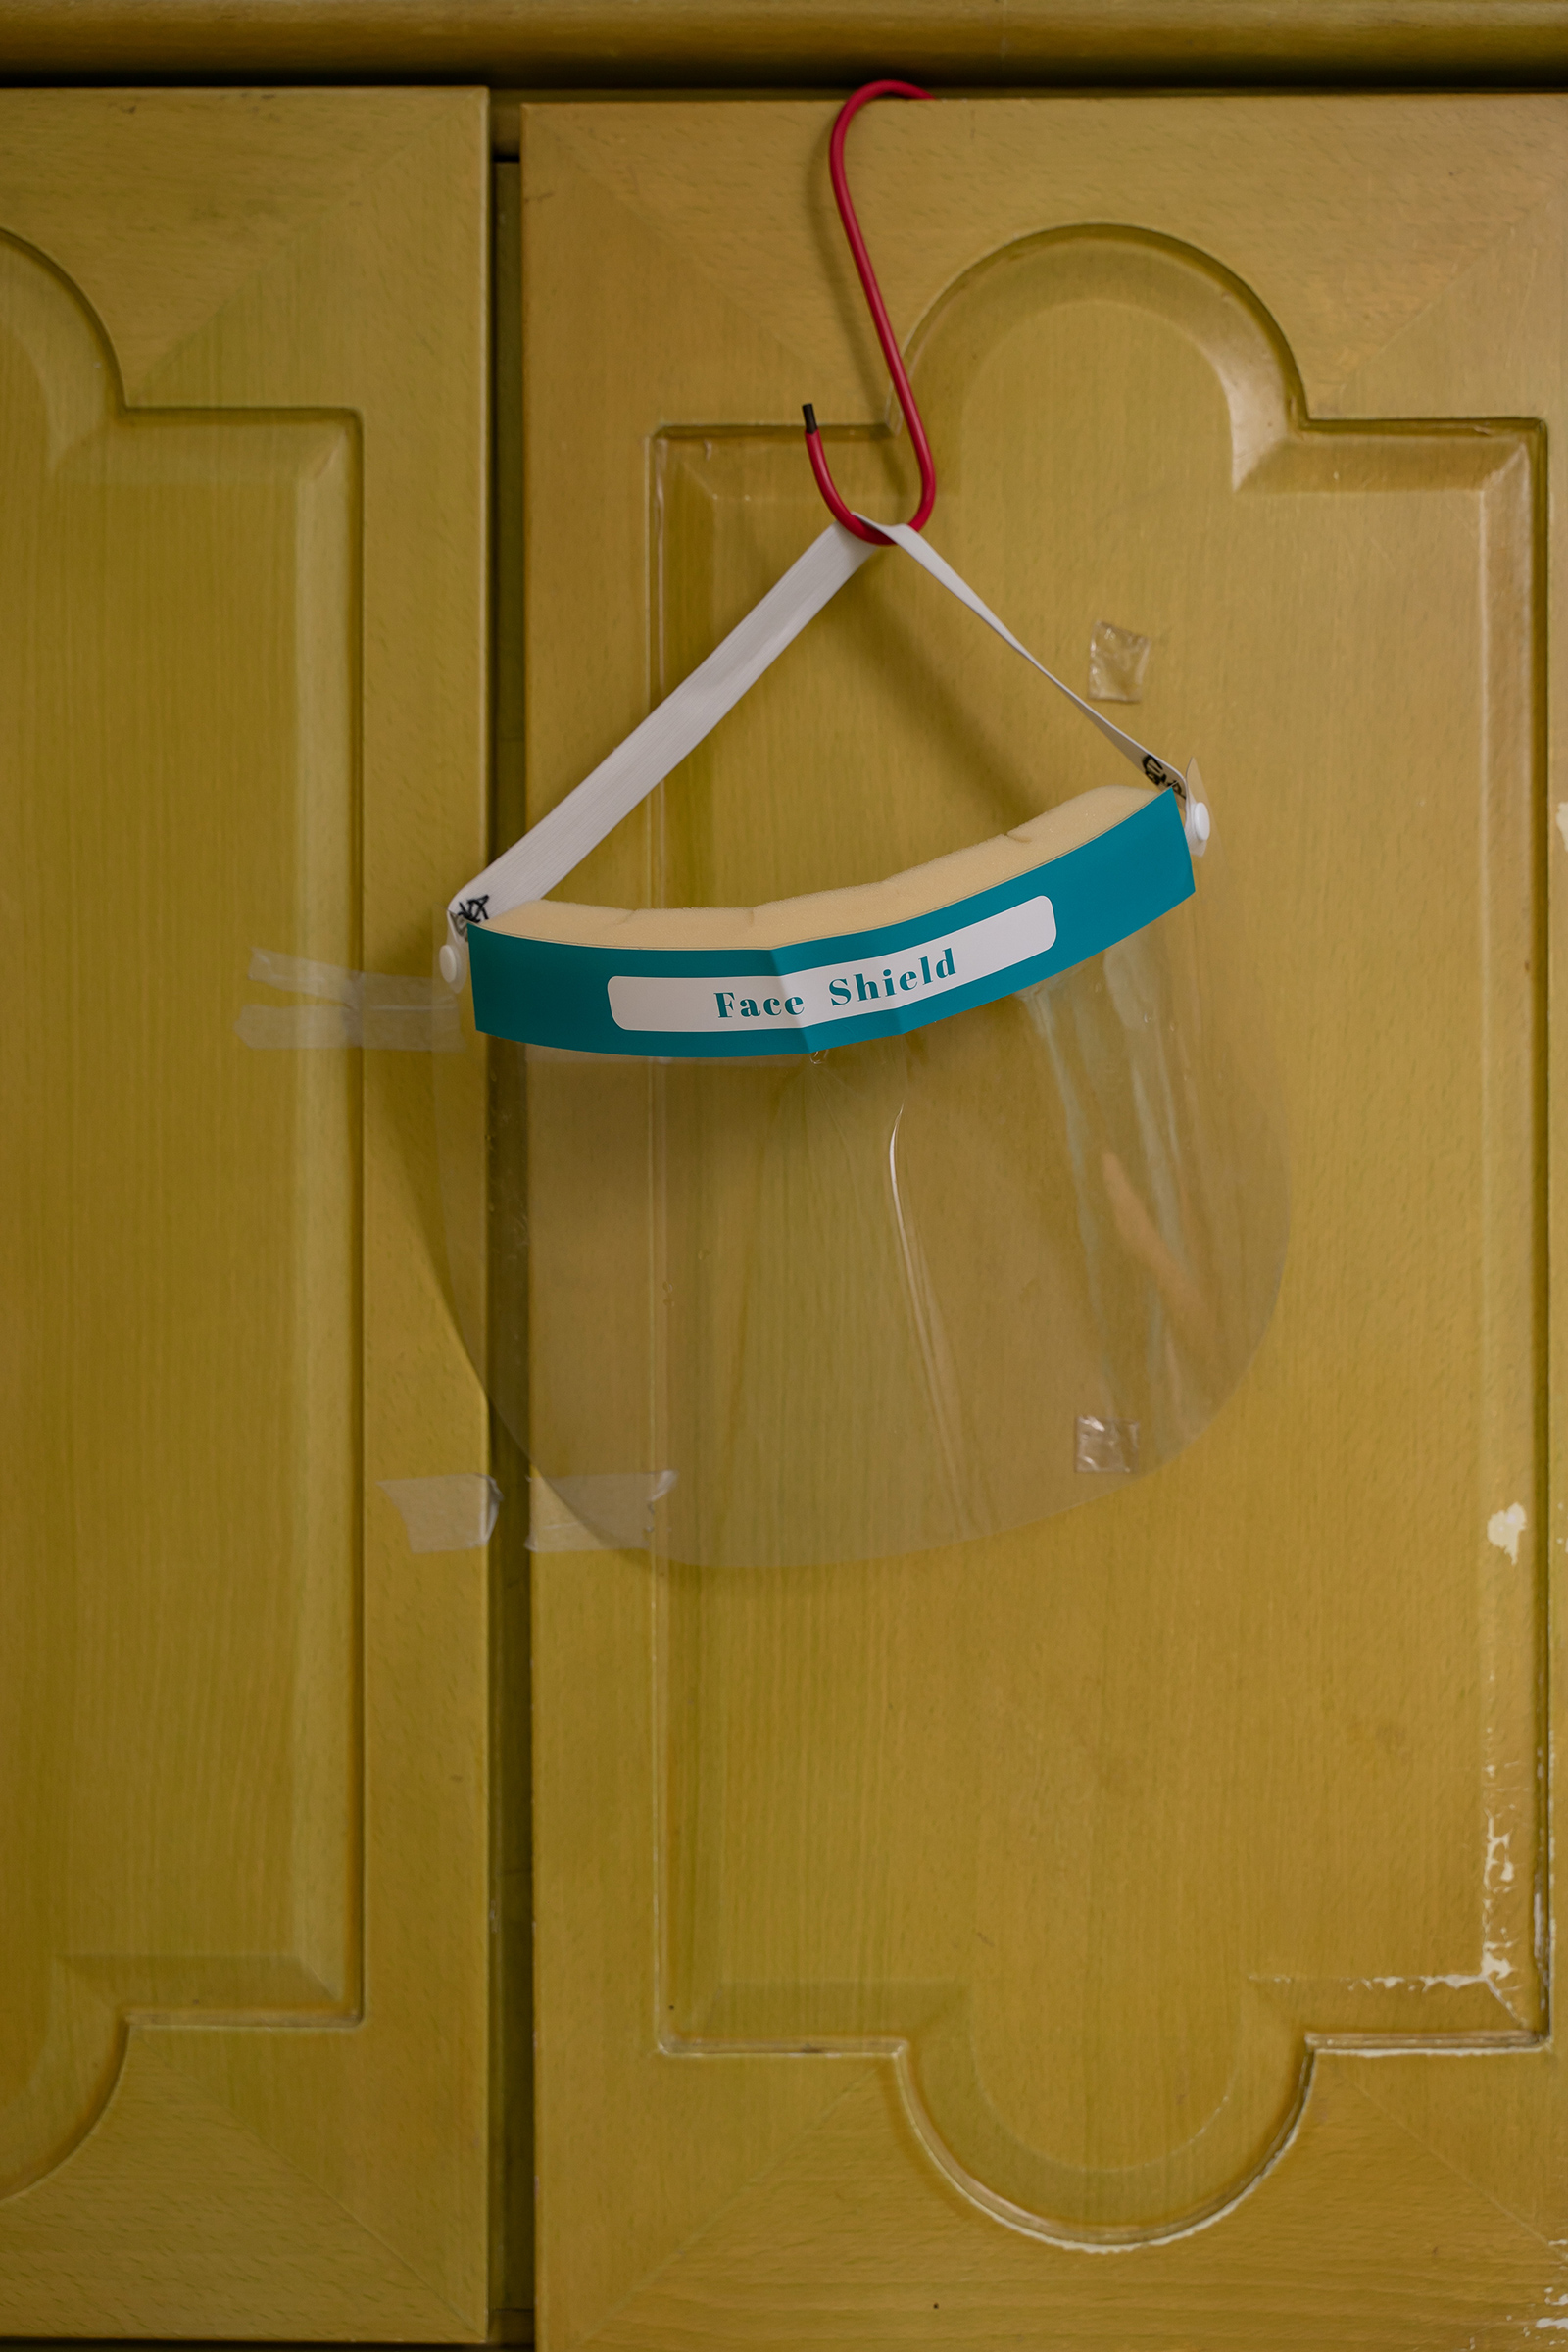 A face shield is hung on a cabinet at Kei Tak (Tai Hang) Home For The Aged.